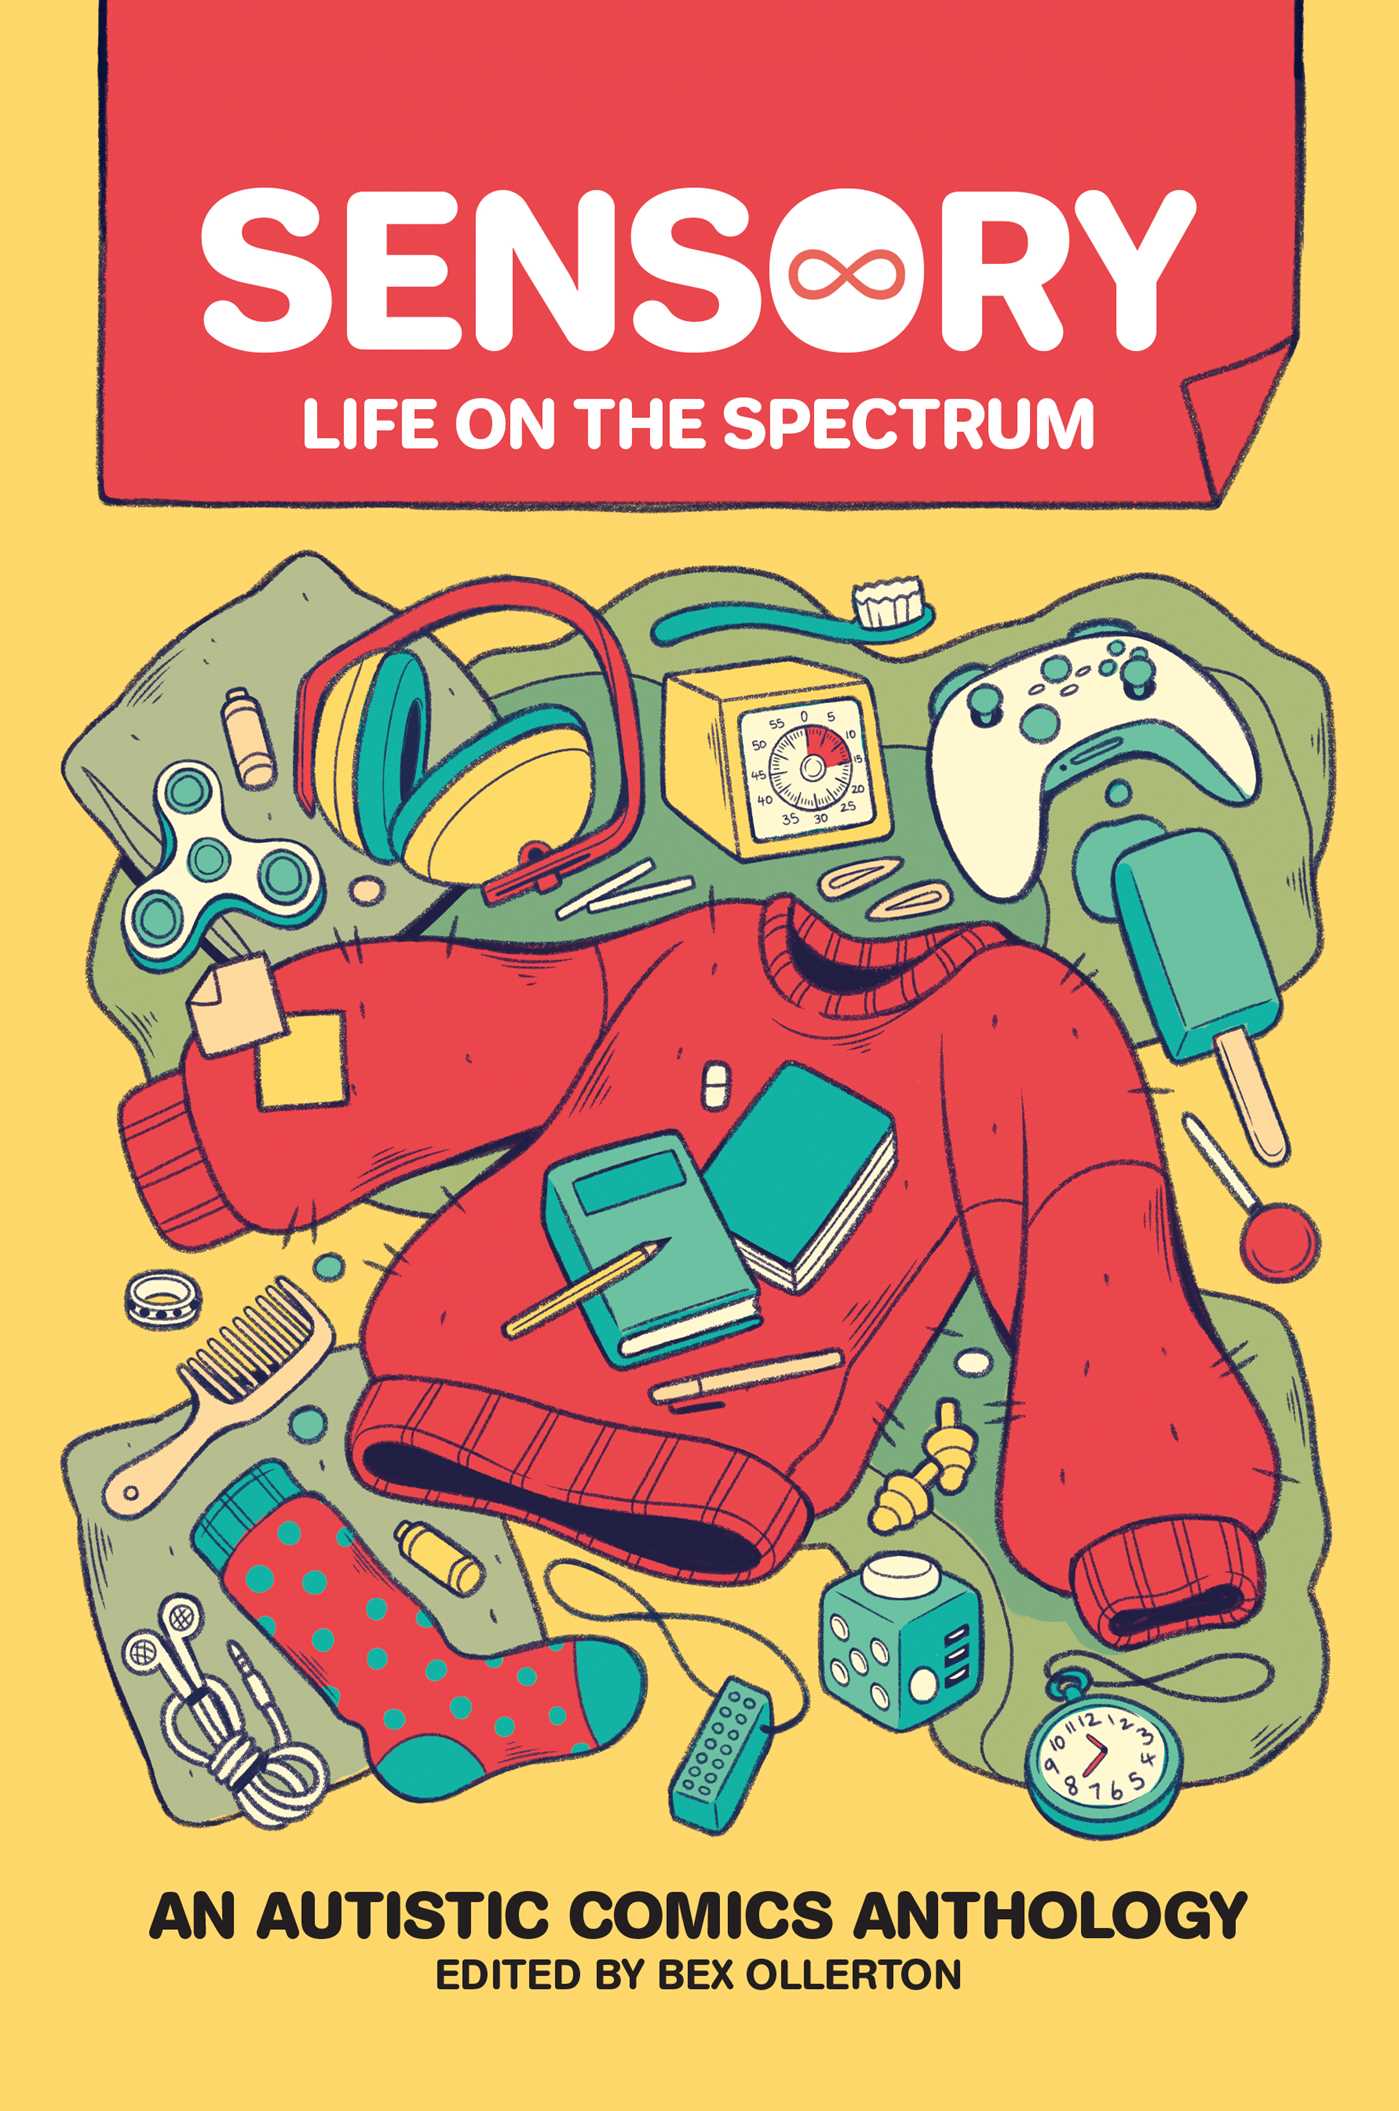 Book cover image of Sensory Life on the Spectrum